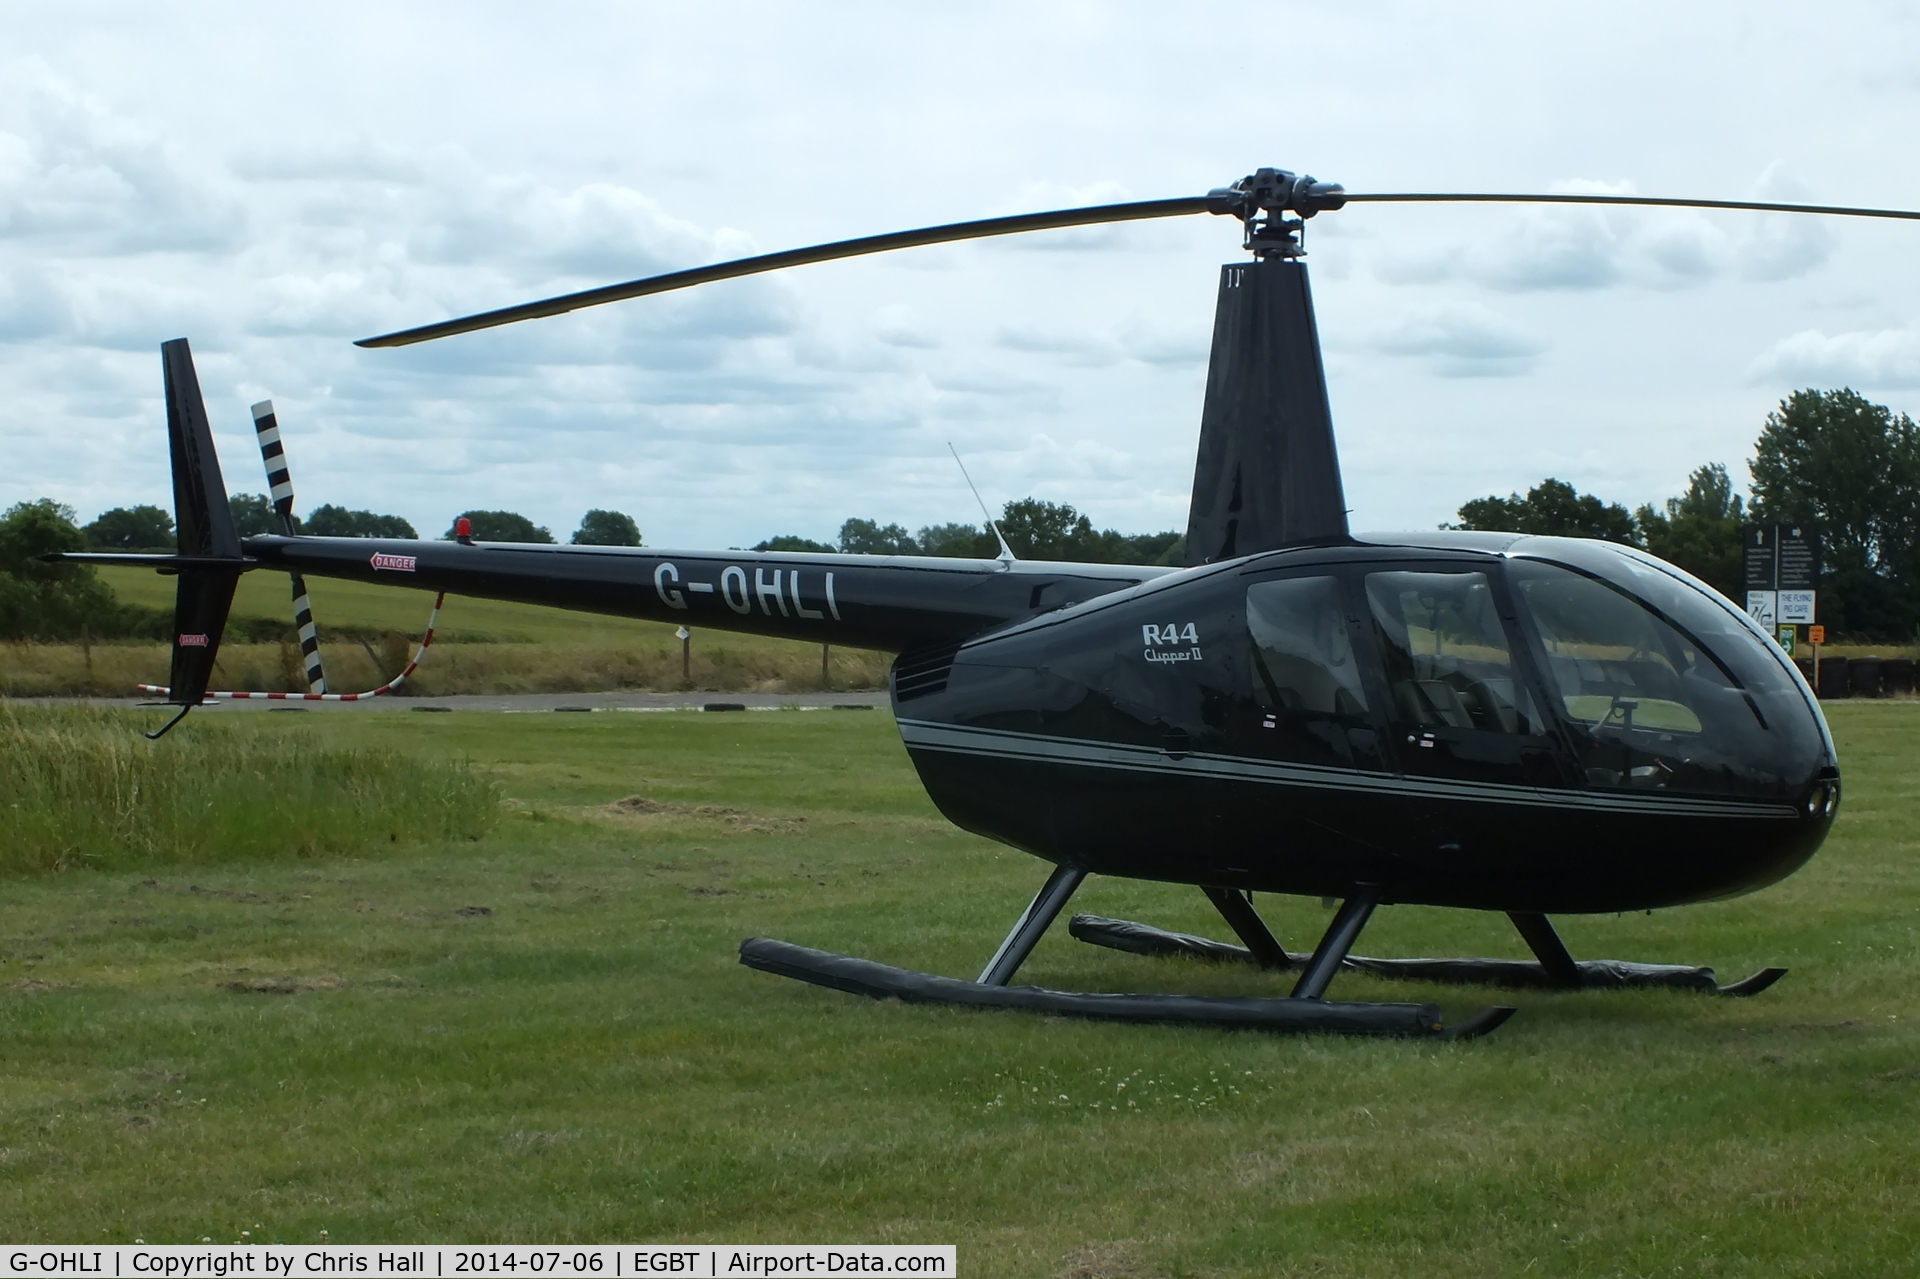 G-OHLI, 2005 Robinson R44 Clipper II C/N 10832, ferrying race fans to the British F1 Grand Prix at Silverstone